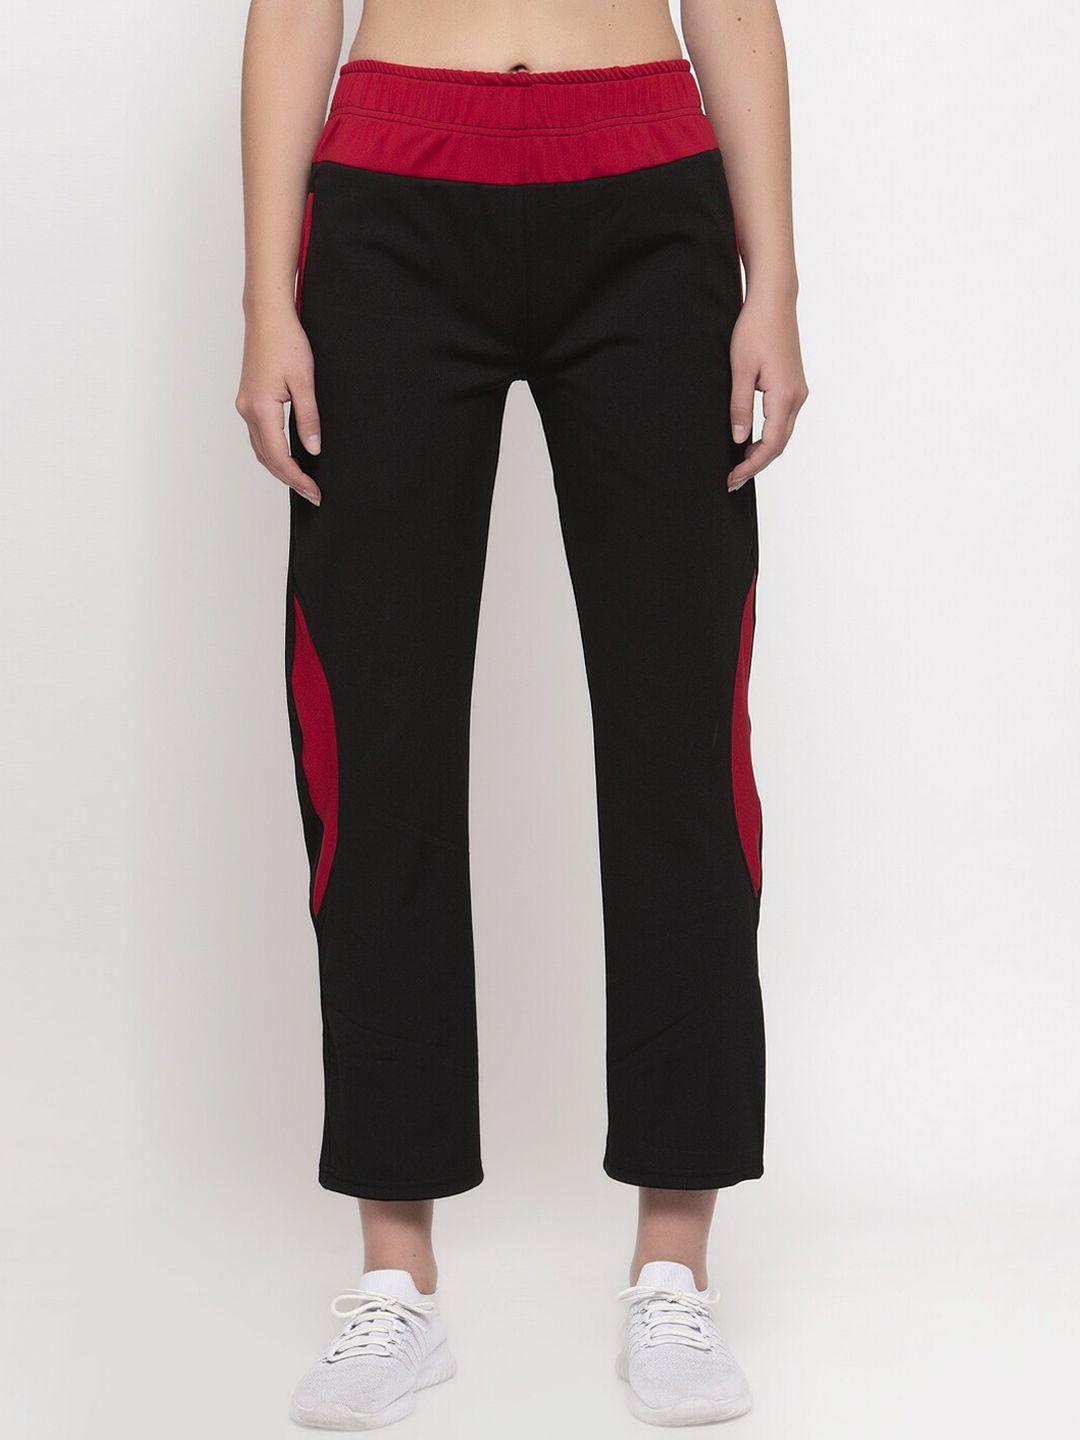 cukoo women black & red solid trackpants